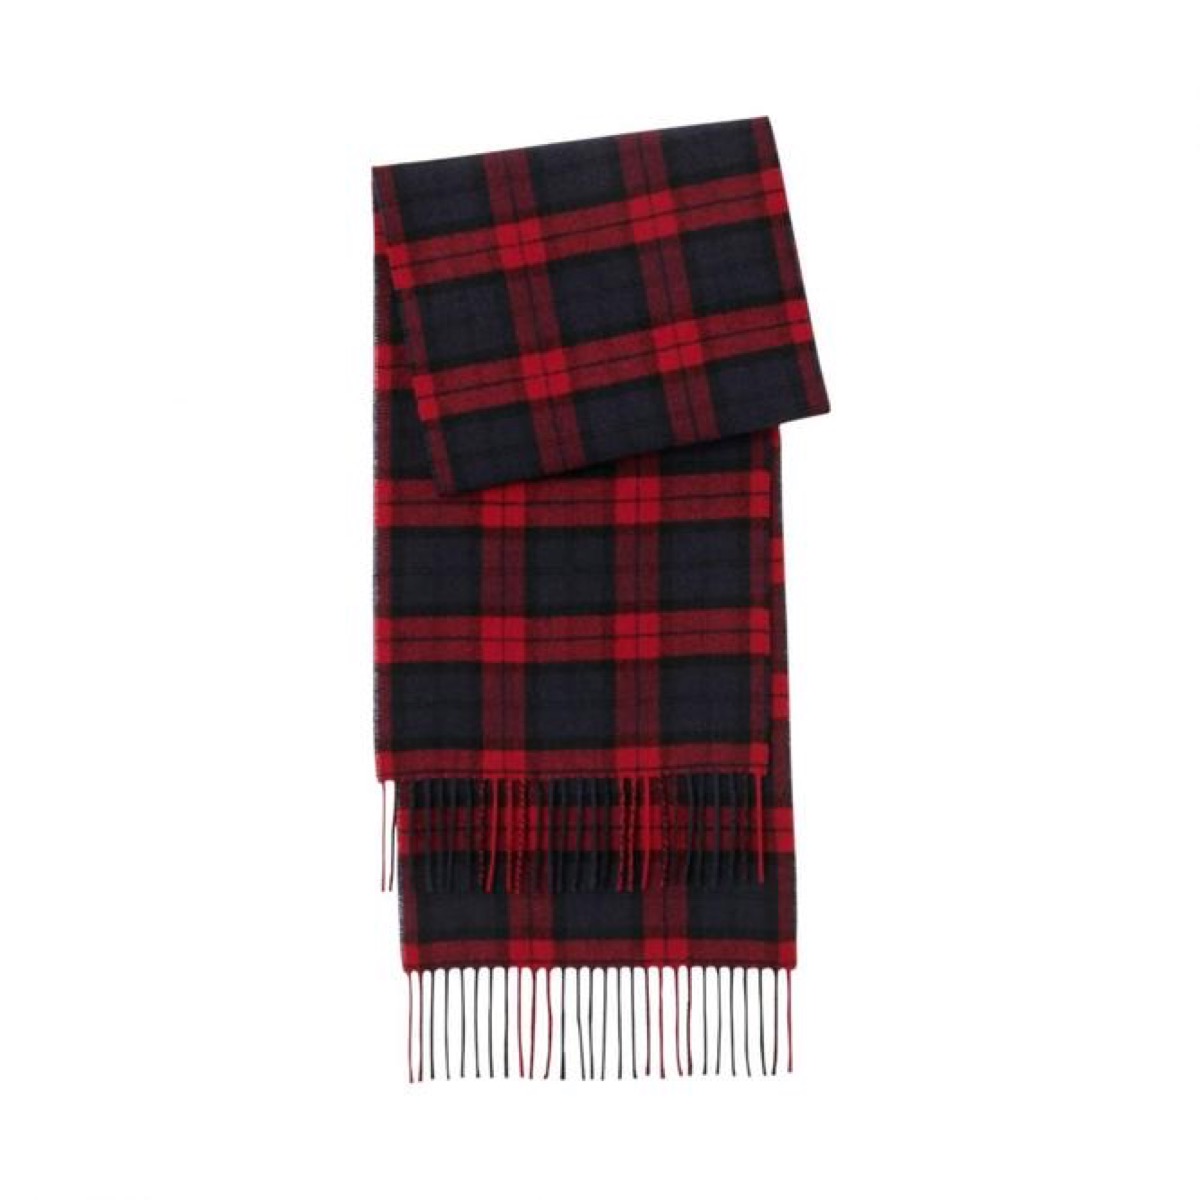 A red wool scarf